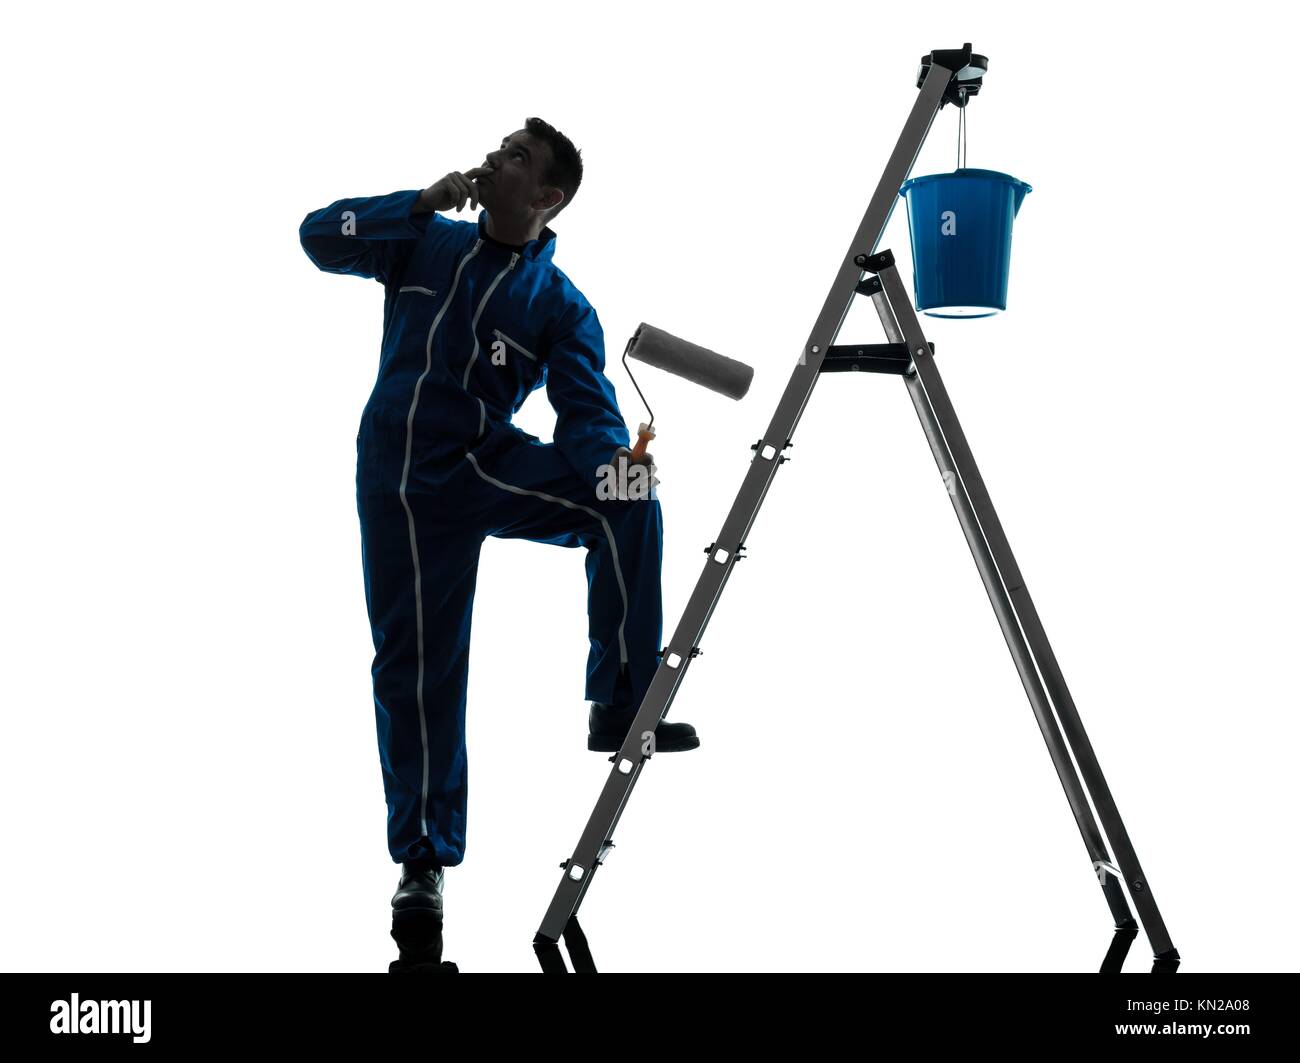 one-caucasian-man-house-painter-worker-silhouette-in-studio-on-white-background-stock-photo-alamy